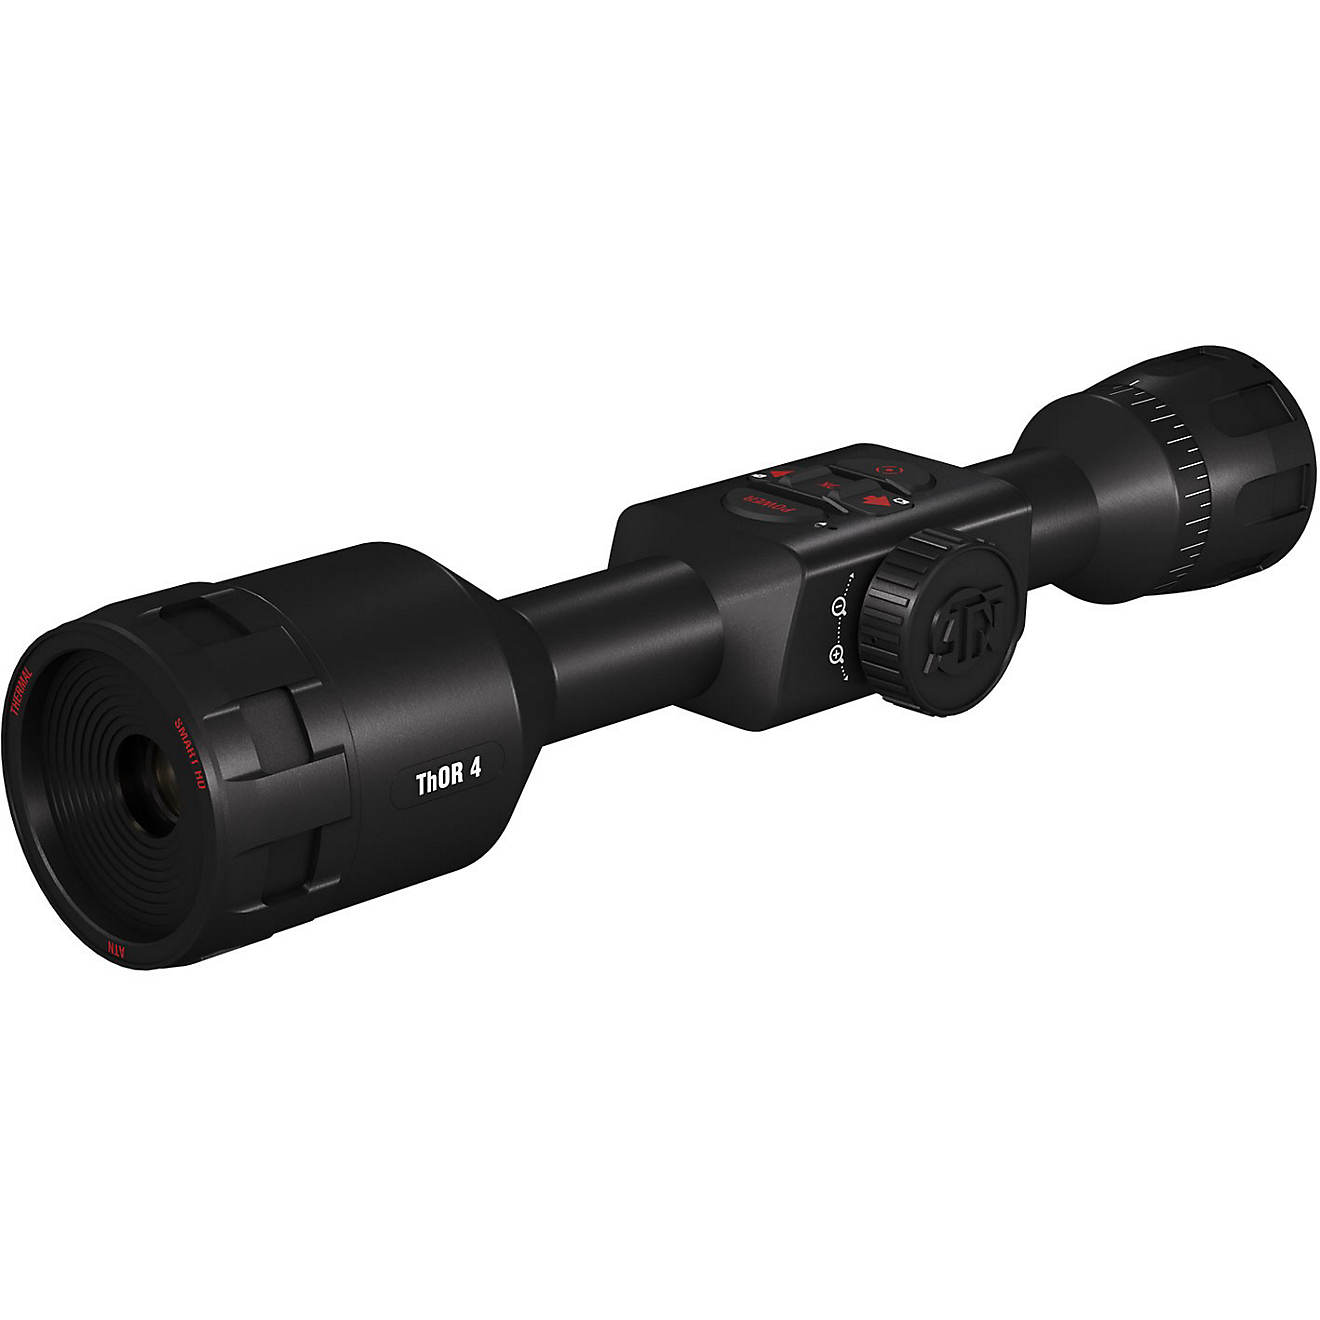 ATN Thor 4 384 HD 1.25 - 5 x 19 Thermal Riflescope                                                                               - view number 1